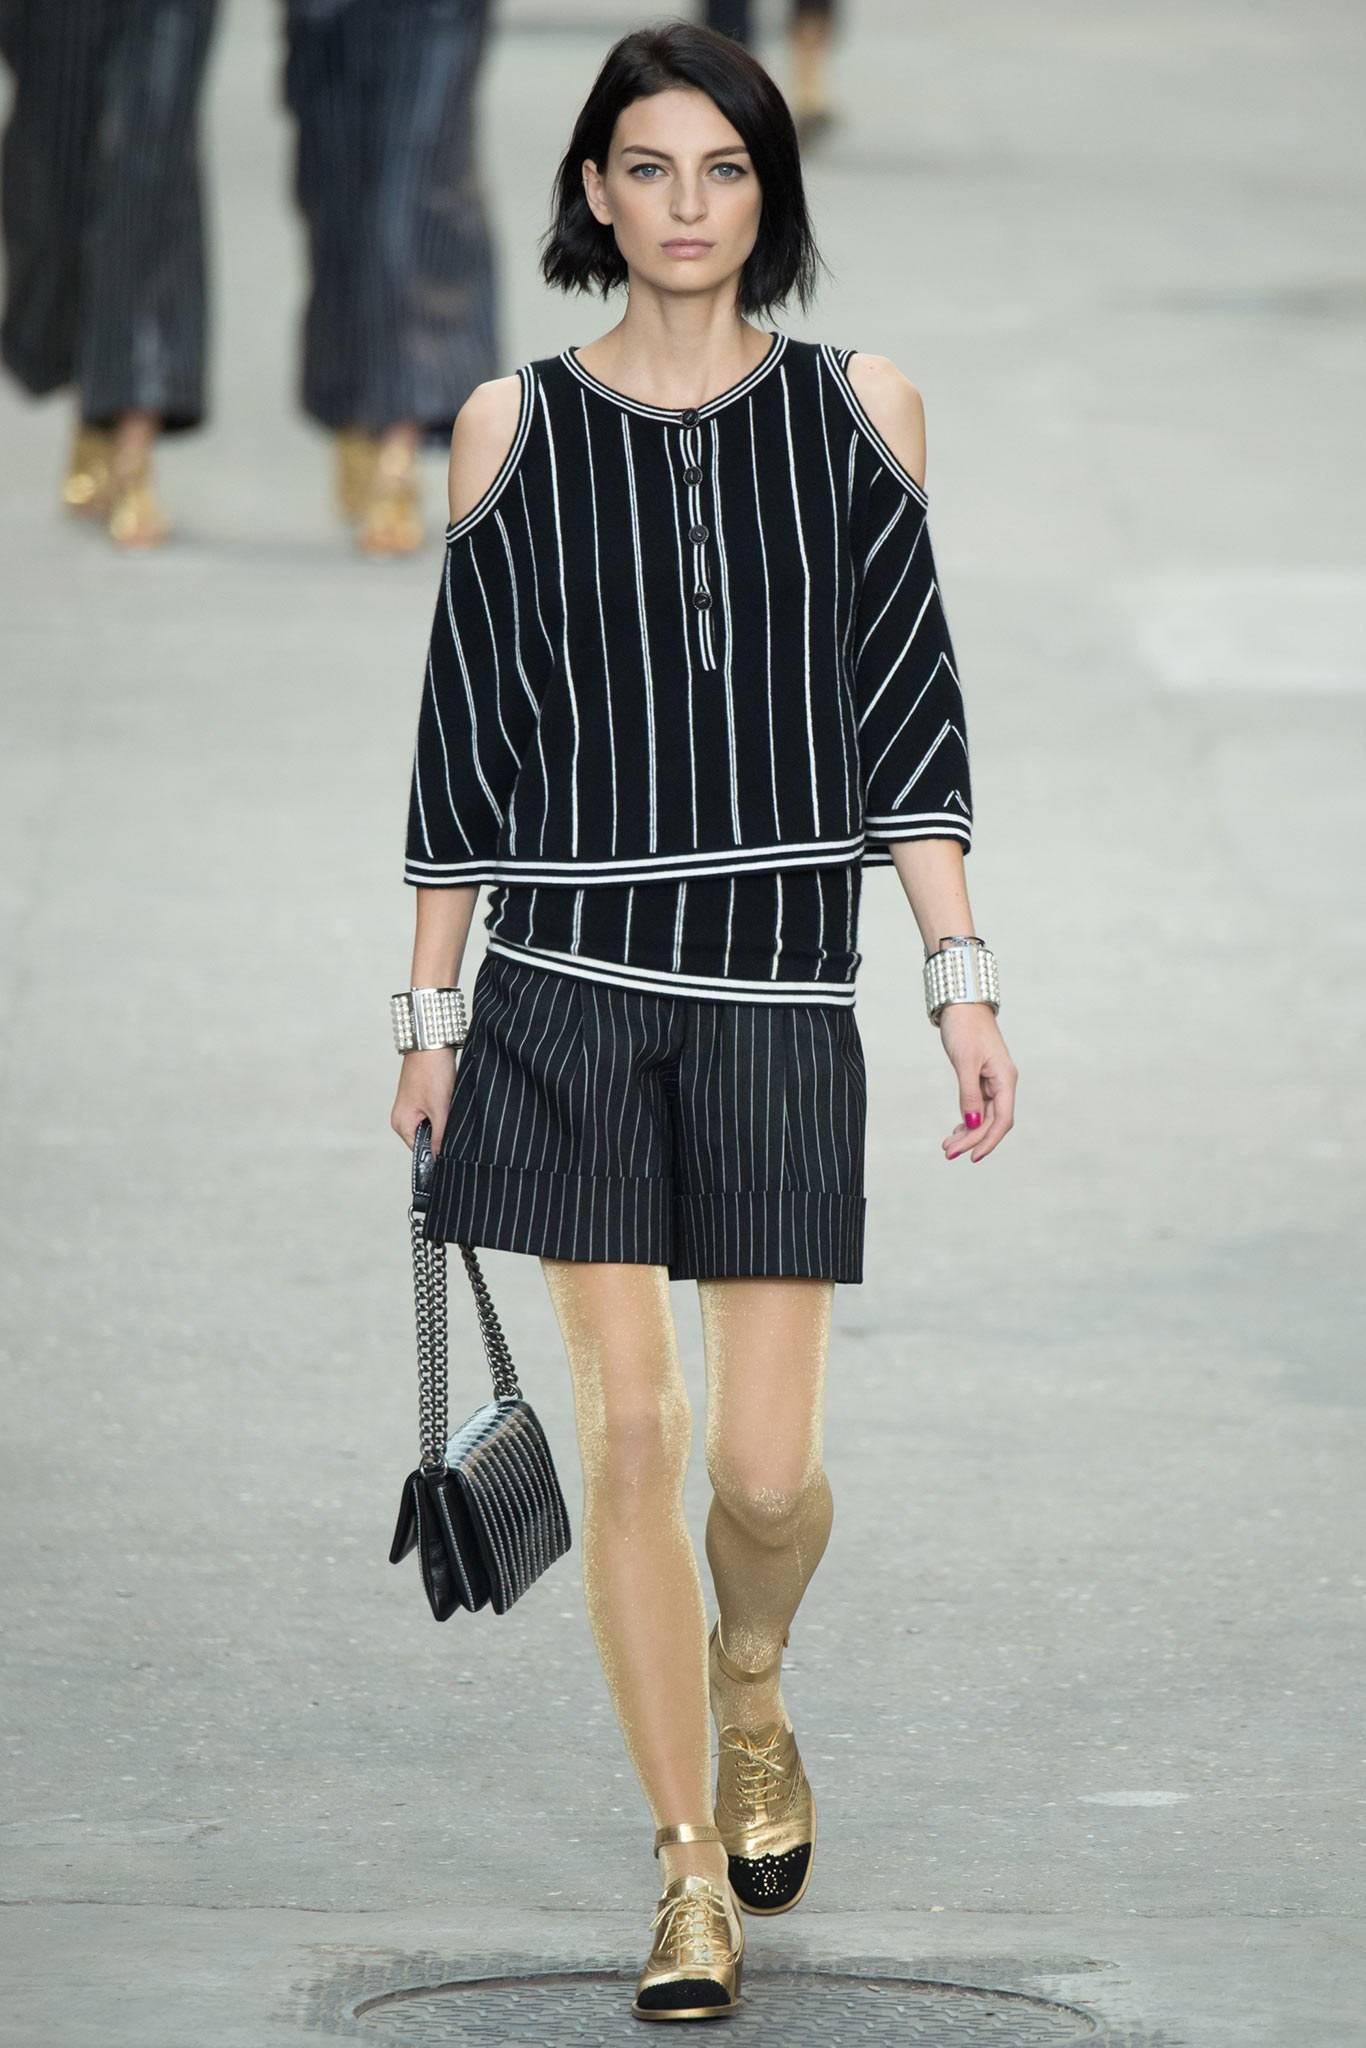 Chanel 2015 spring runway black and white striped cashmere 2pc tank and top.  Fitted long tank top with cold shoulder design crop top. 100% cashmere. Tank is tagged size FR 38 and top FR 38/40. Best for 34/35